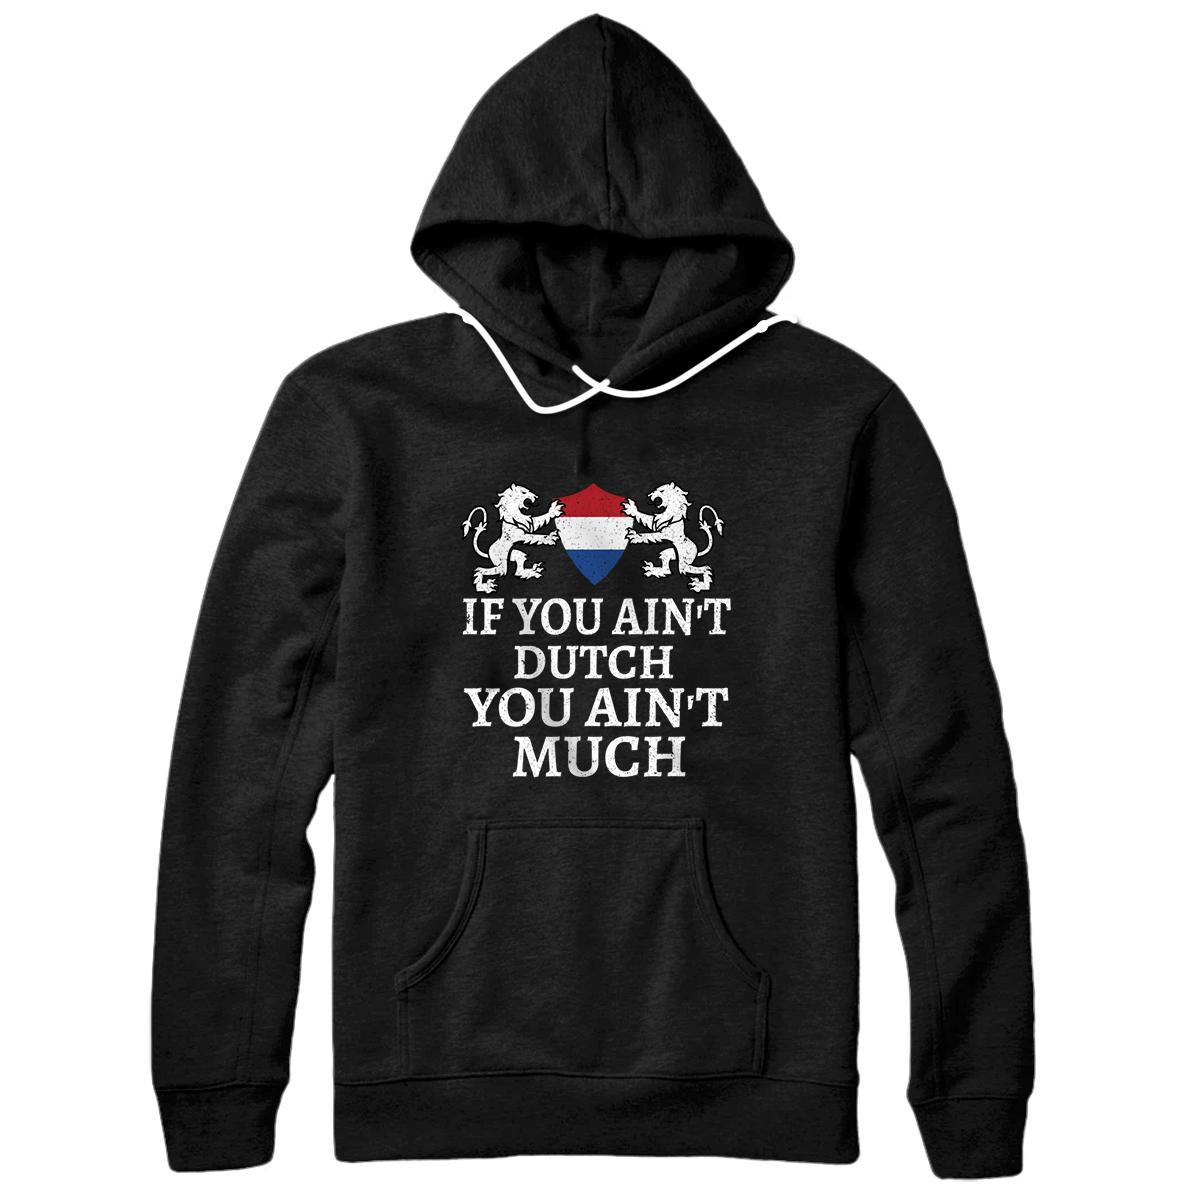 If You Ain't Dutch, You Ain't Much T-shirt Netherlands Flag Pullover Hoodie